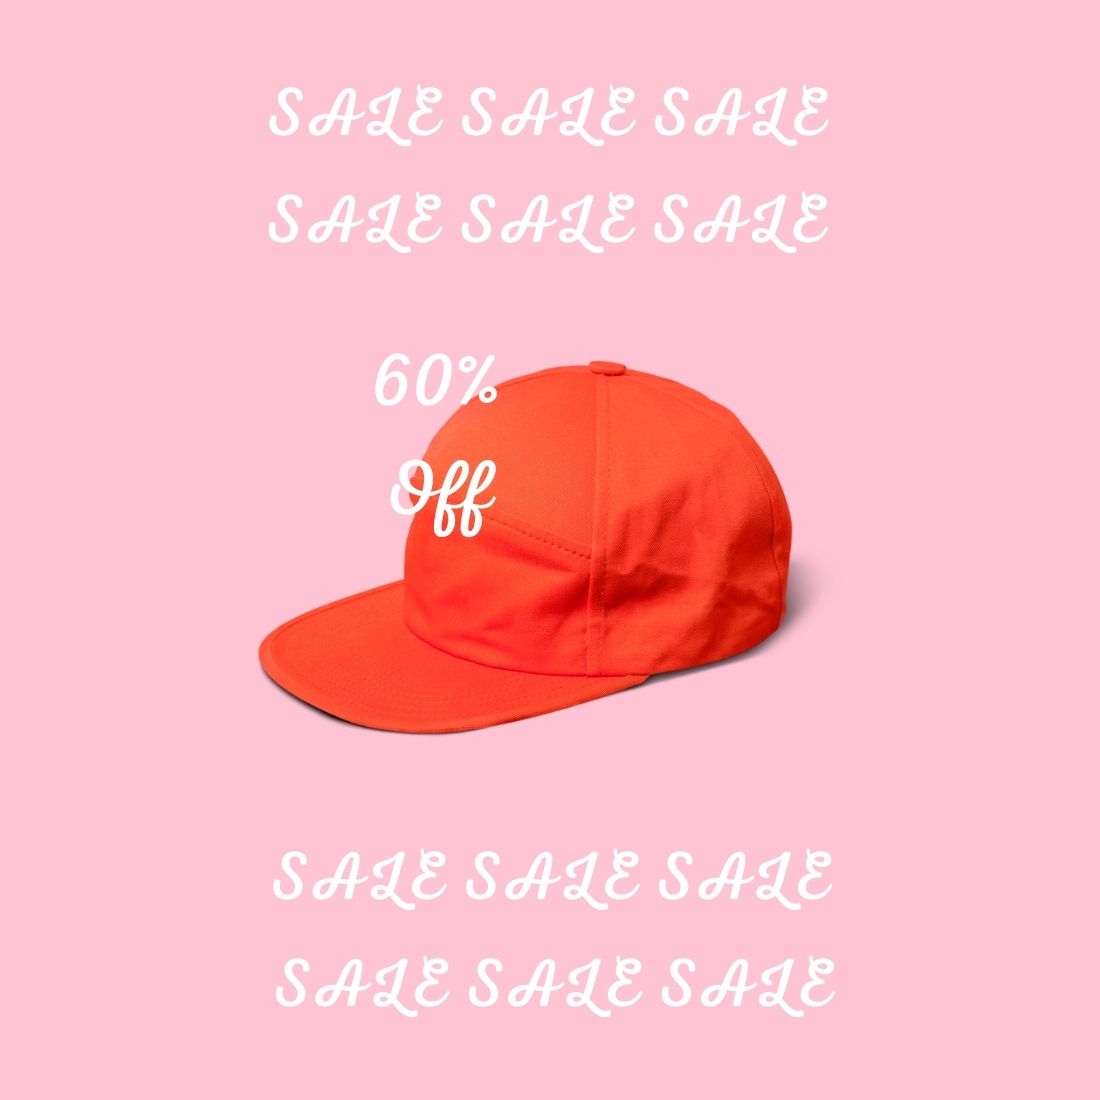 Pink background with a red cap.